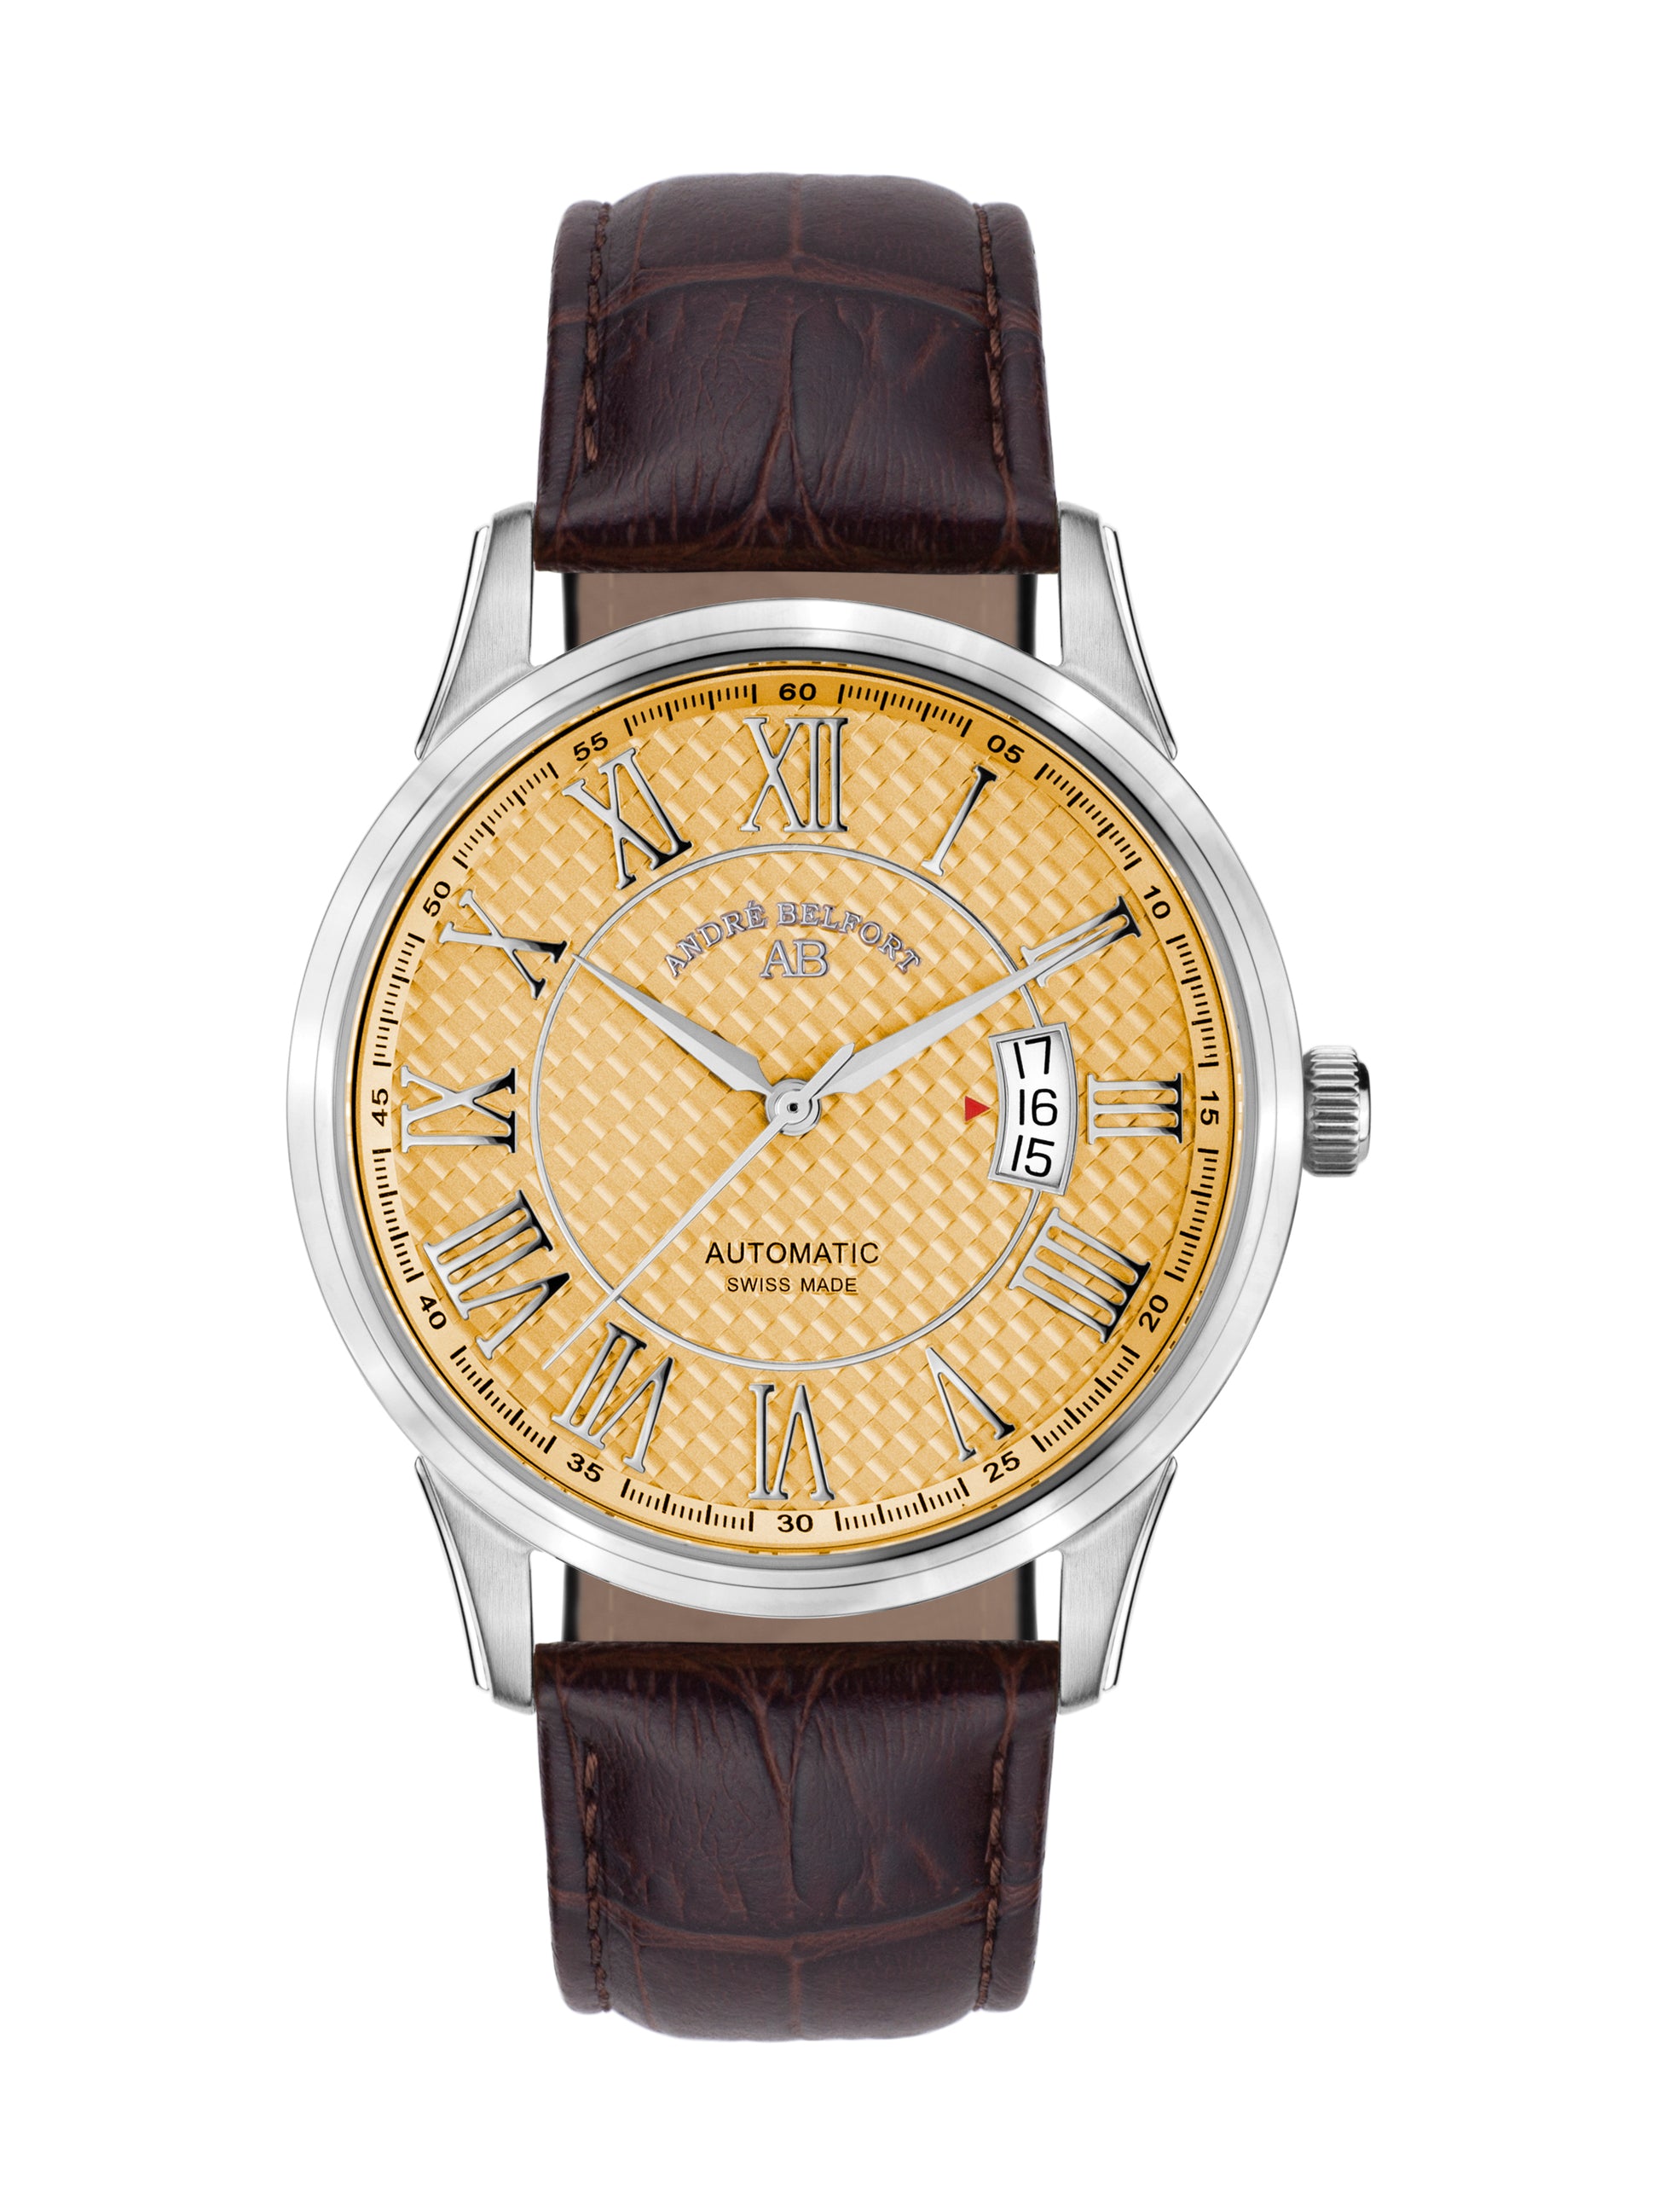 Automatic watches — Le Maître — André Belfort — steel champagner leather